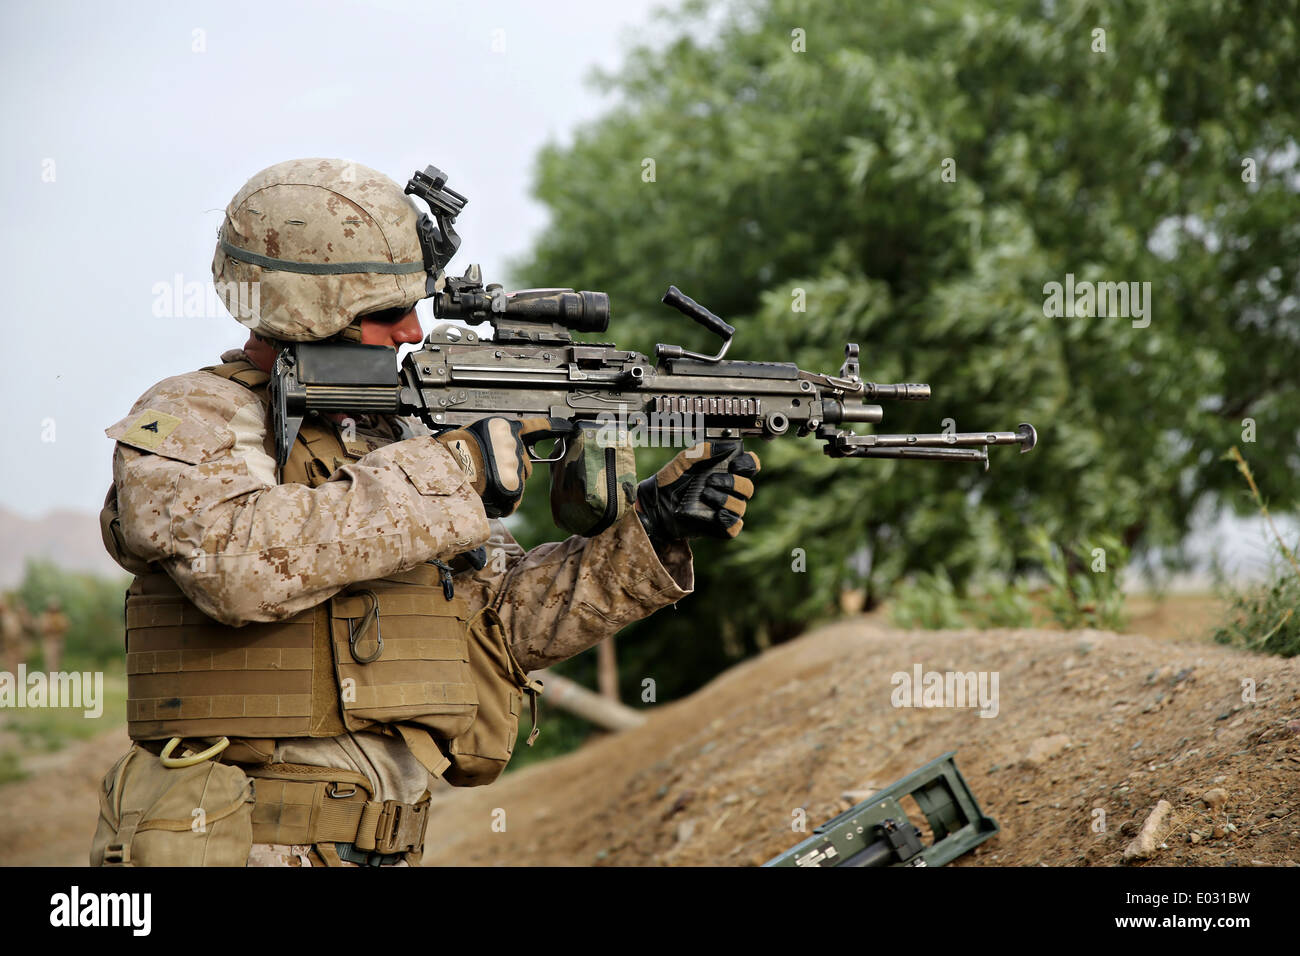 us-marine-lance-cpl-jonathan-griffiths-keeps-watch-with-a-m249-squad-E031BW.jpg